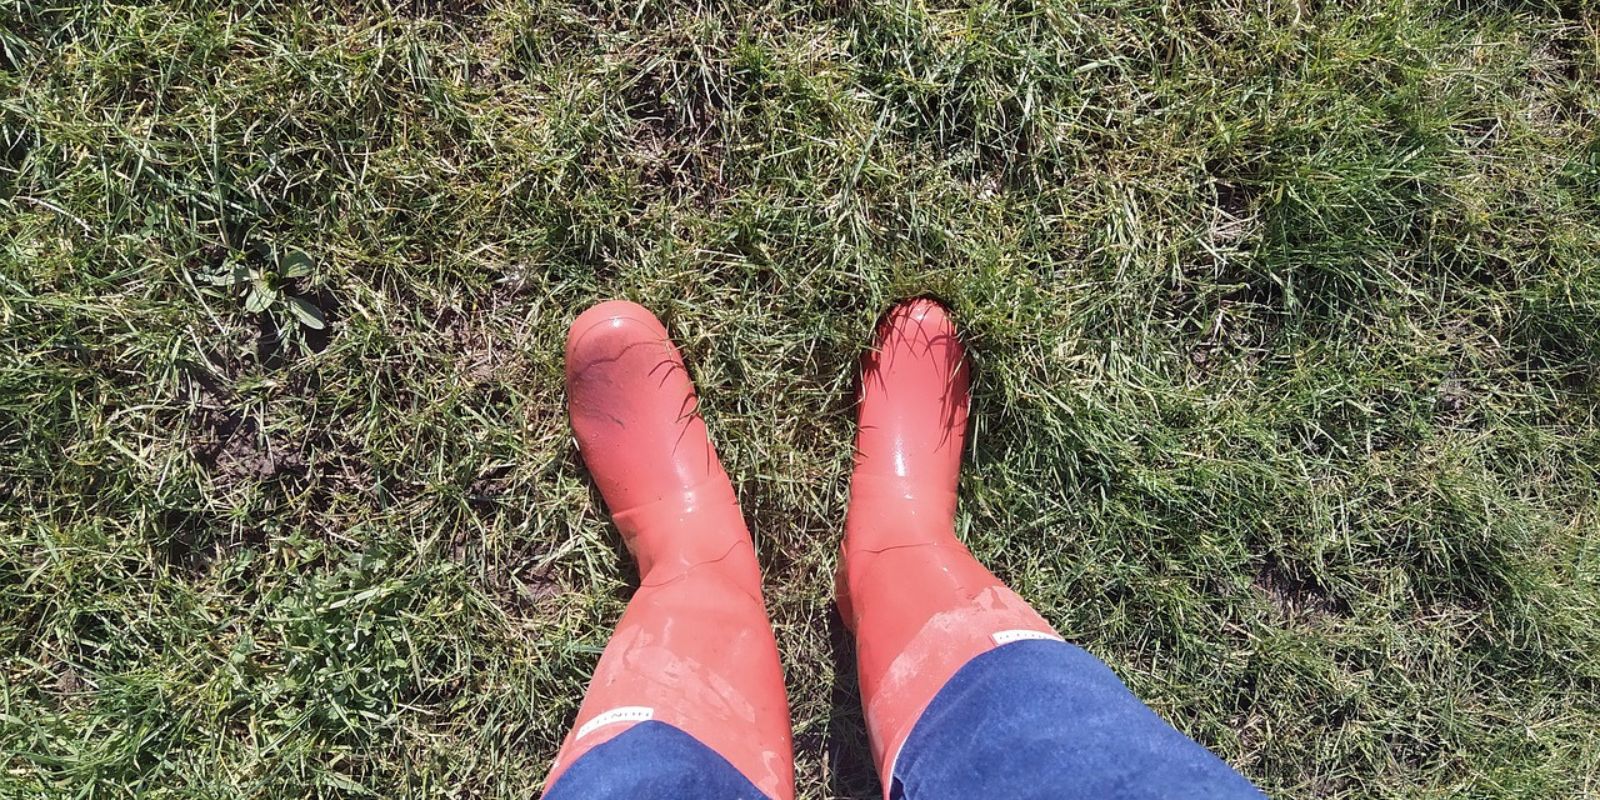 A person standing on grass wearing wellies